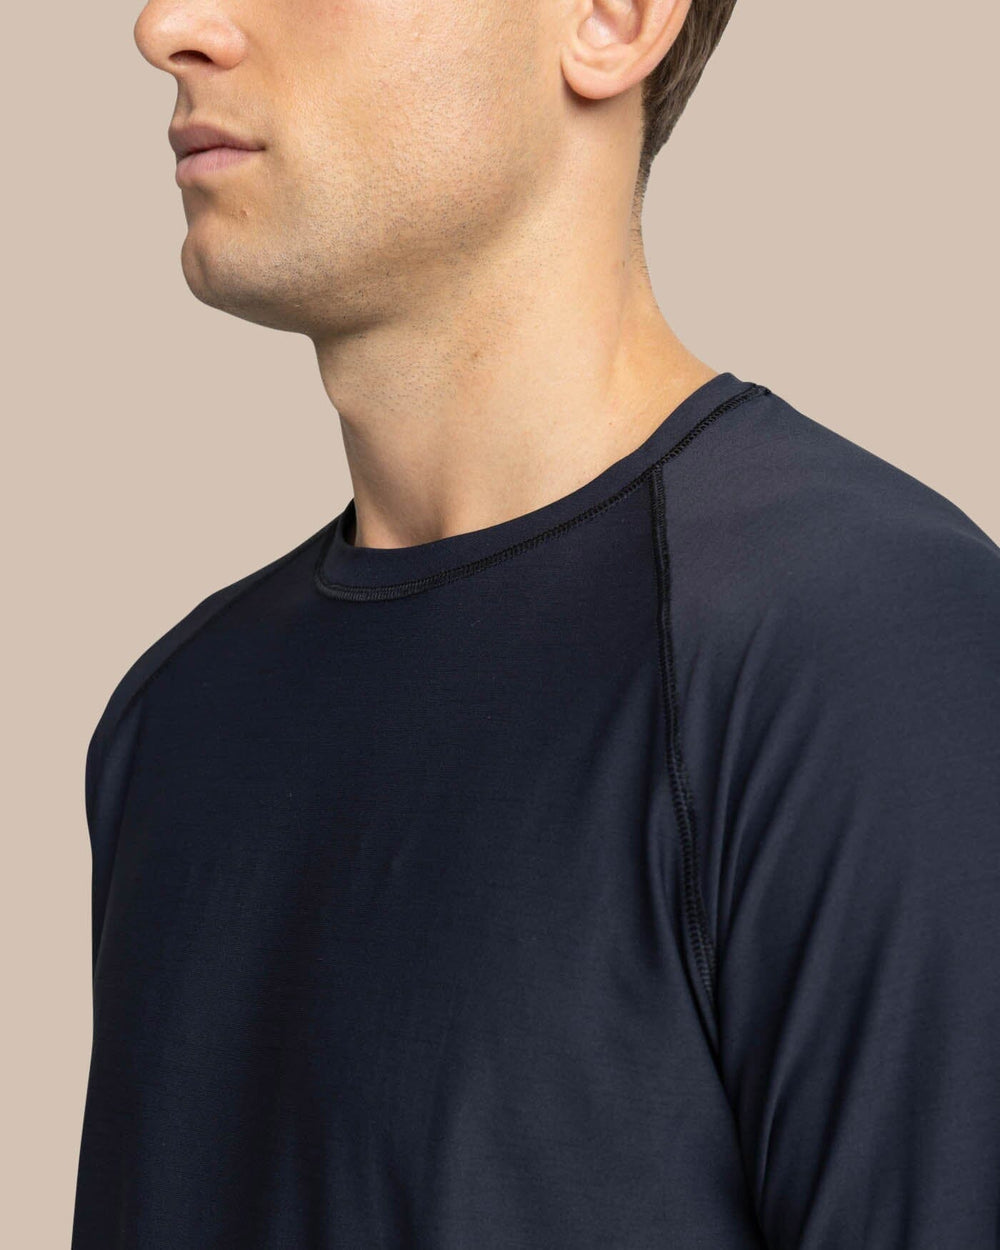 The detail view of the Southern Tide brrr-illiant Performance Long Sleeve T-Shirt by Southern Tide - Caviar Black